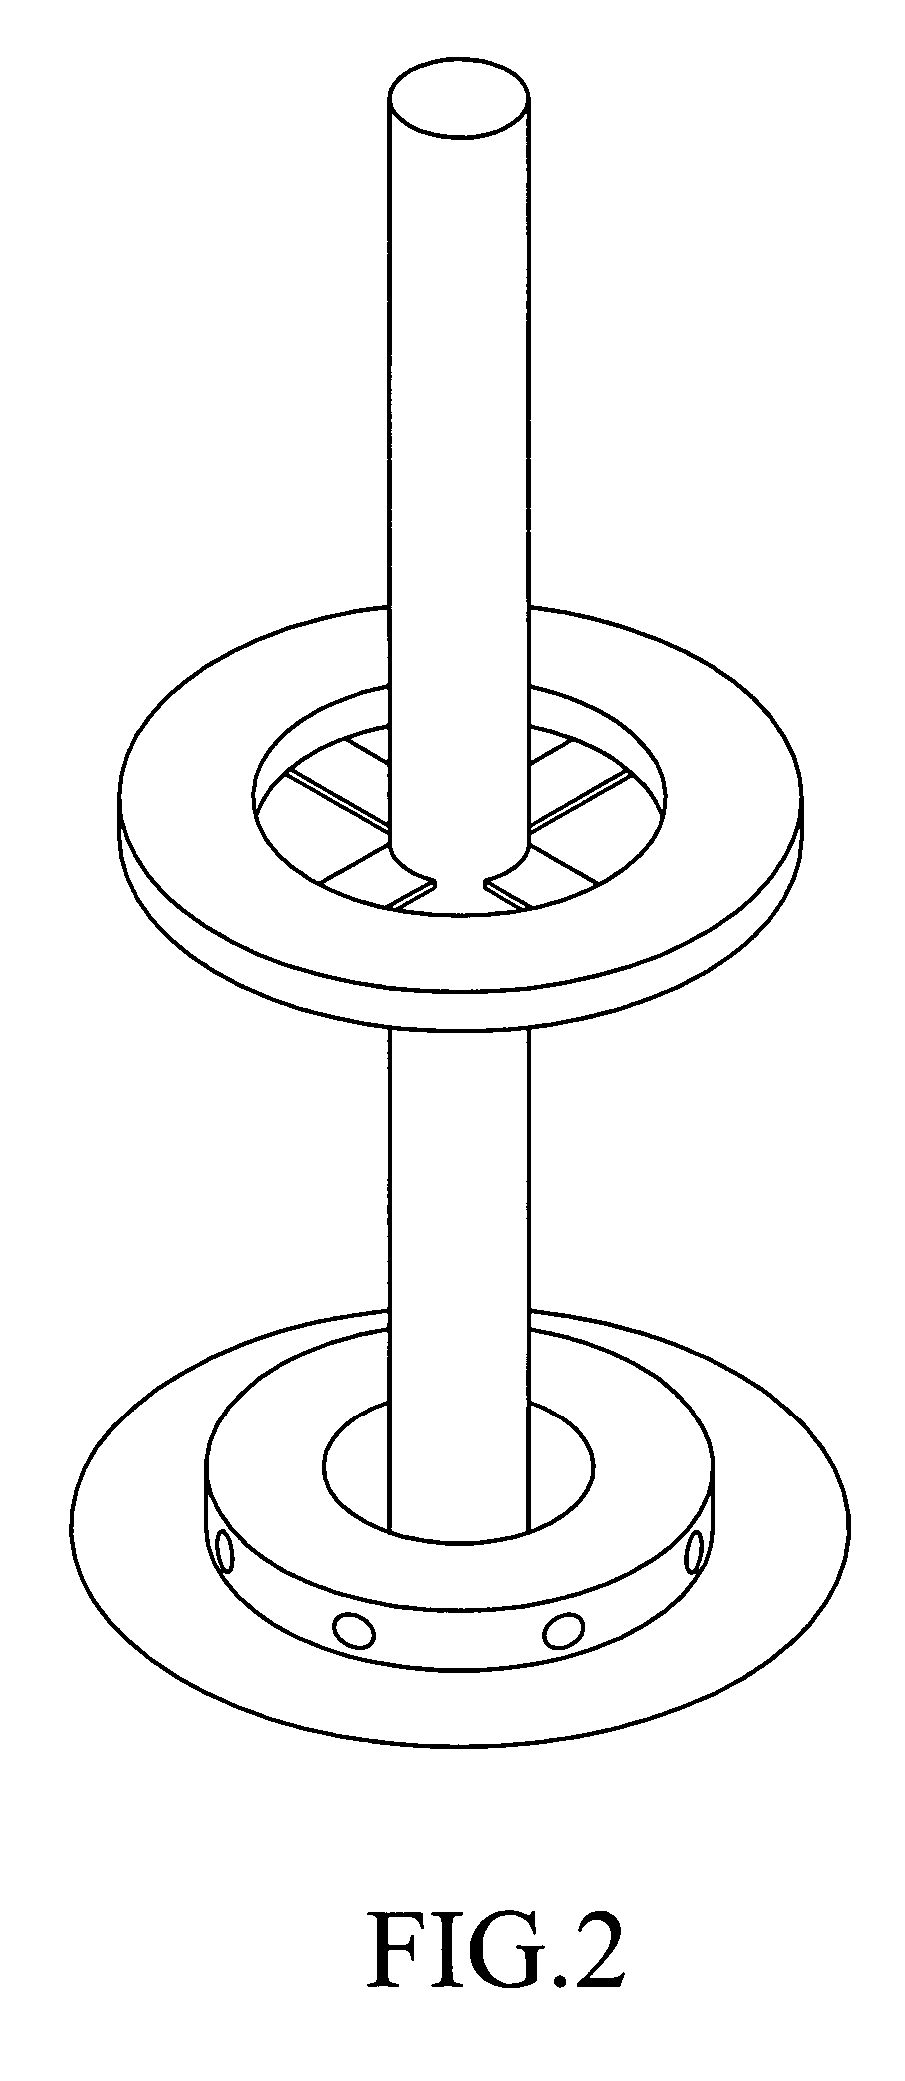 Support structure for radiative heat transfer